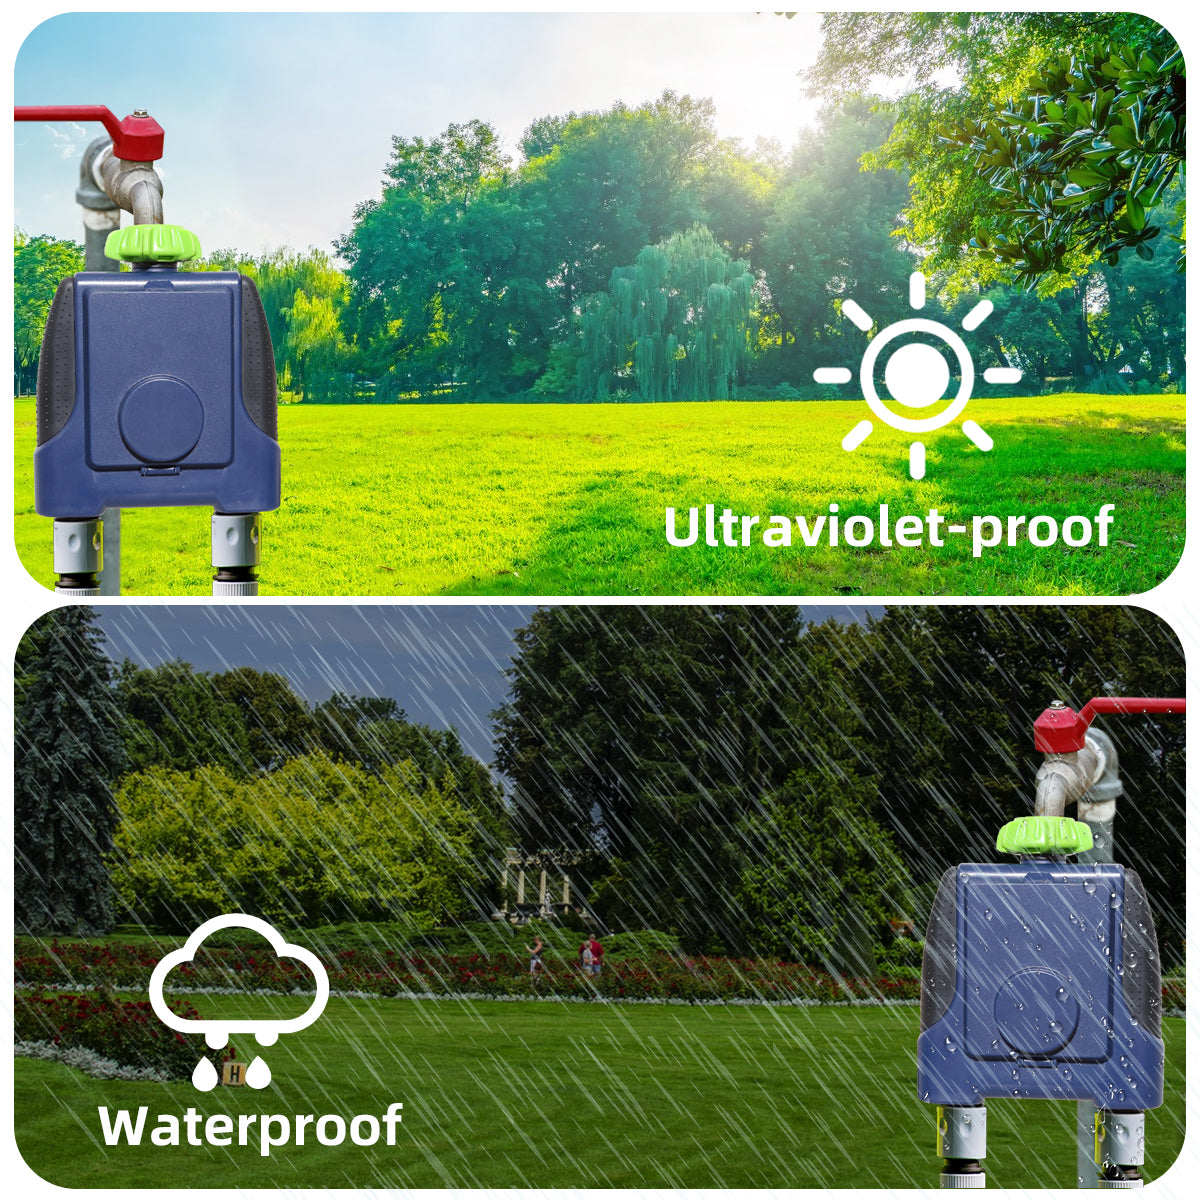 Yardeen Dual Outlets Automatic Watering Timer Solenoid Valve Digital Electronic Sprinkler Timer,IP65 Waterproof Controller System,with Rain Delay Function